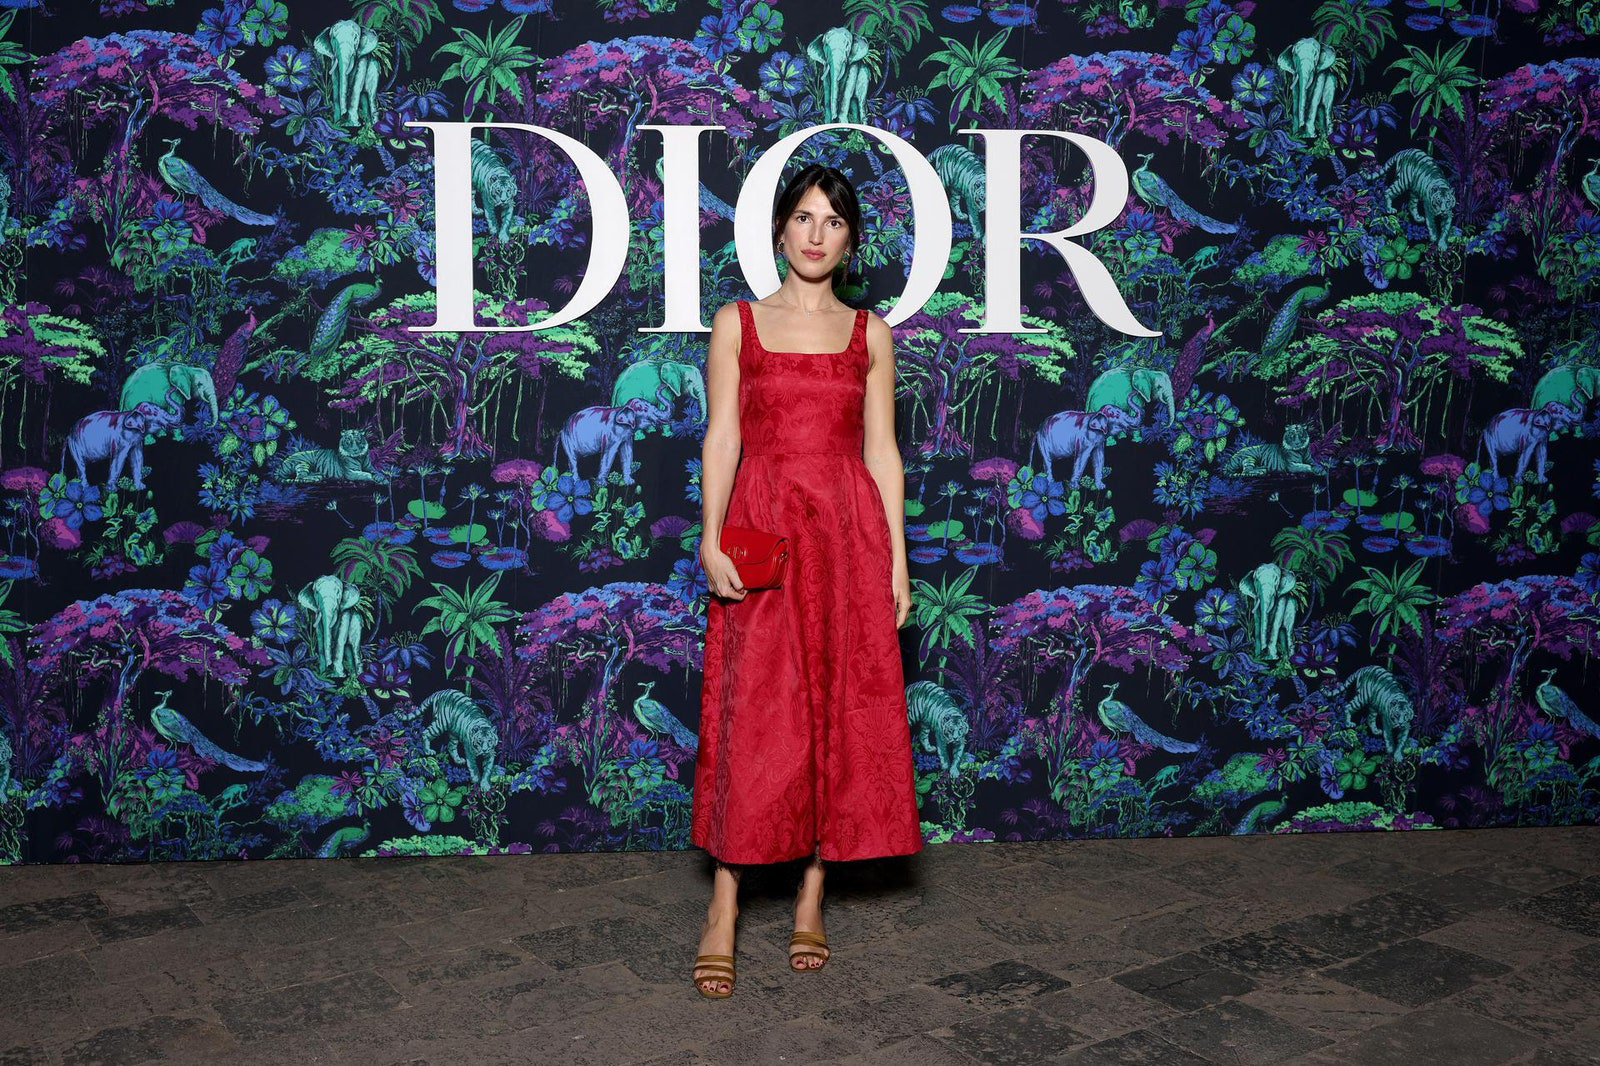 Dior Fall/Winter 2023 Show In Mumbai Jeanne Damas wore a Dior red silk brocade dress. She also wore a Dior bag and shoes